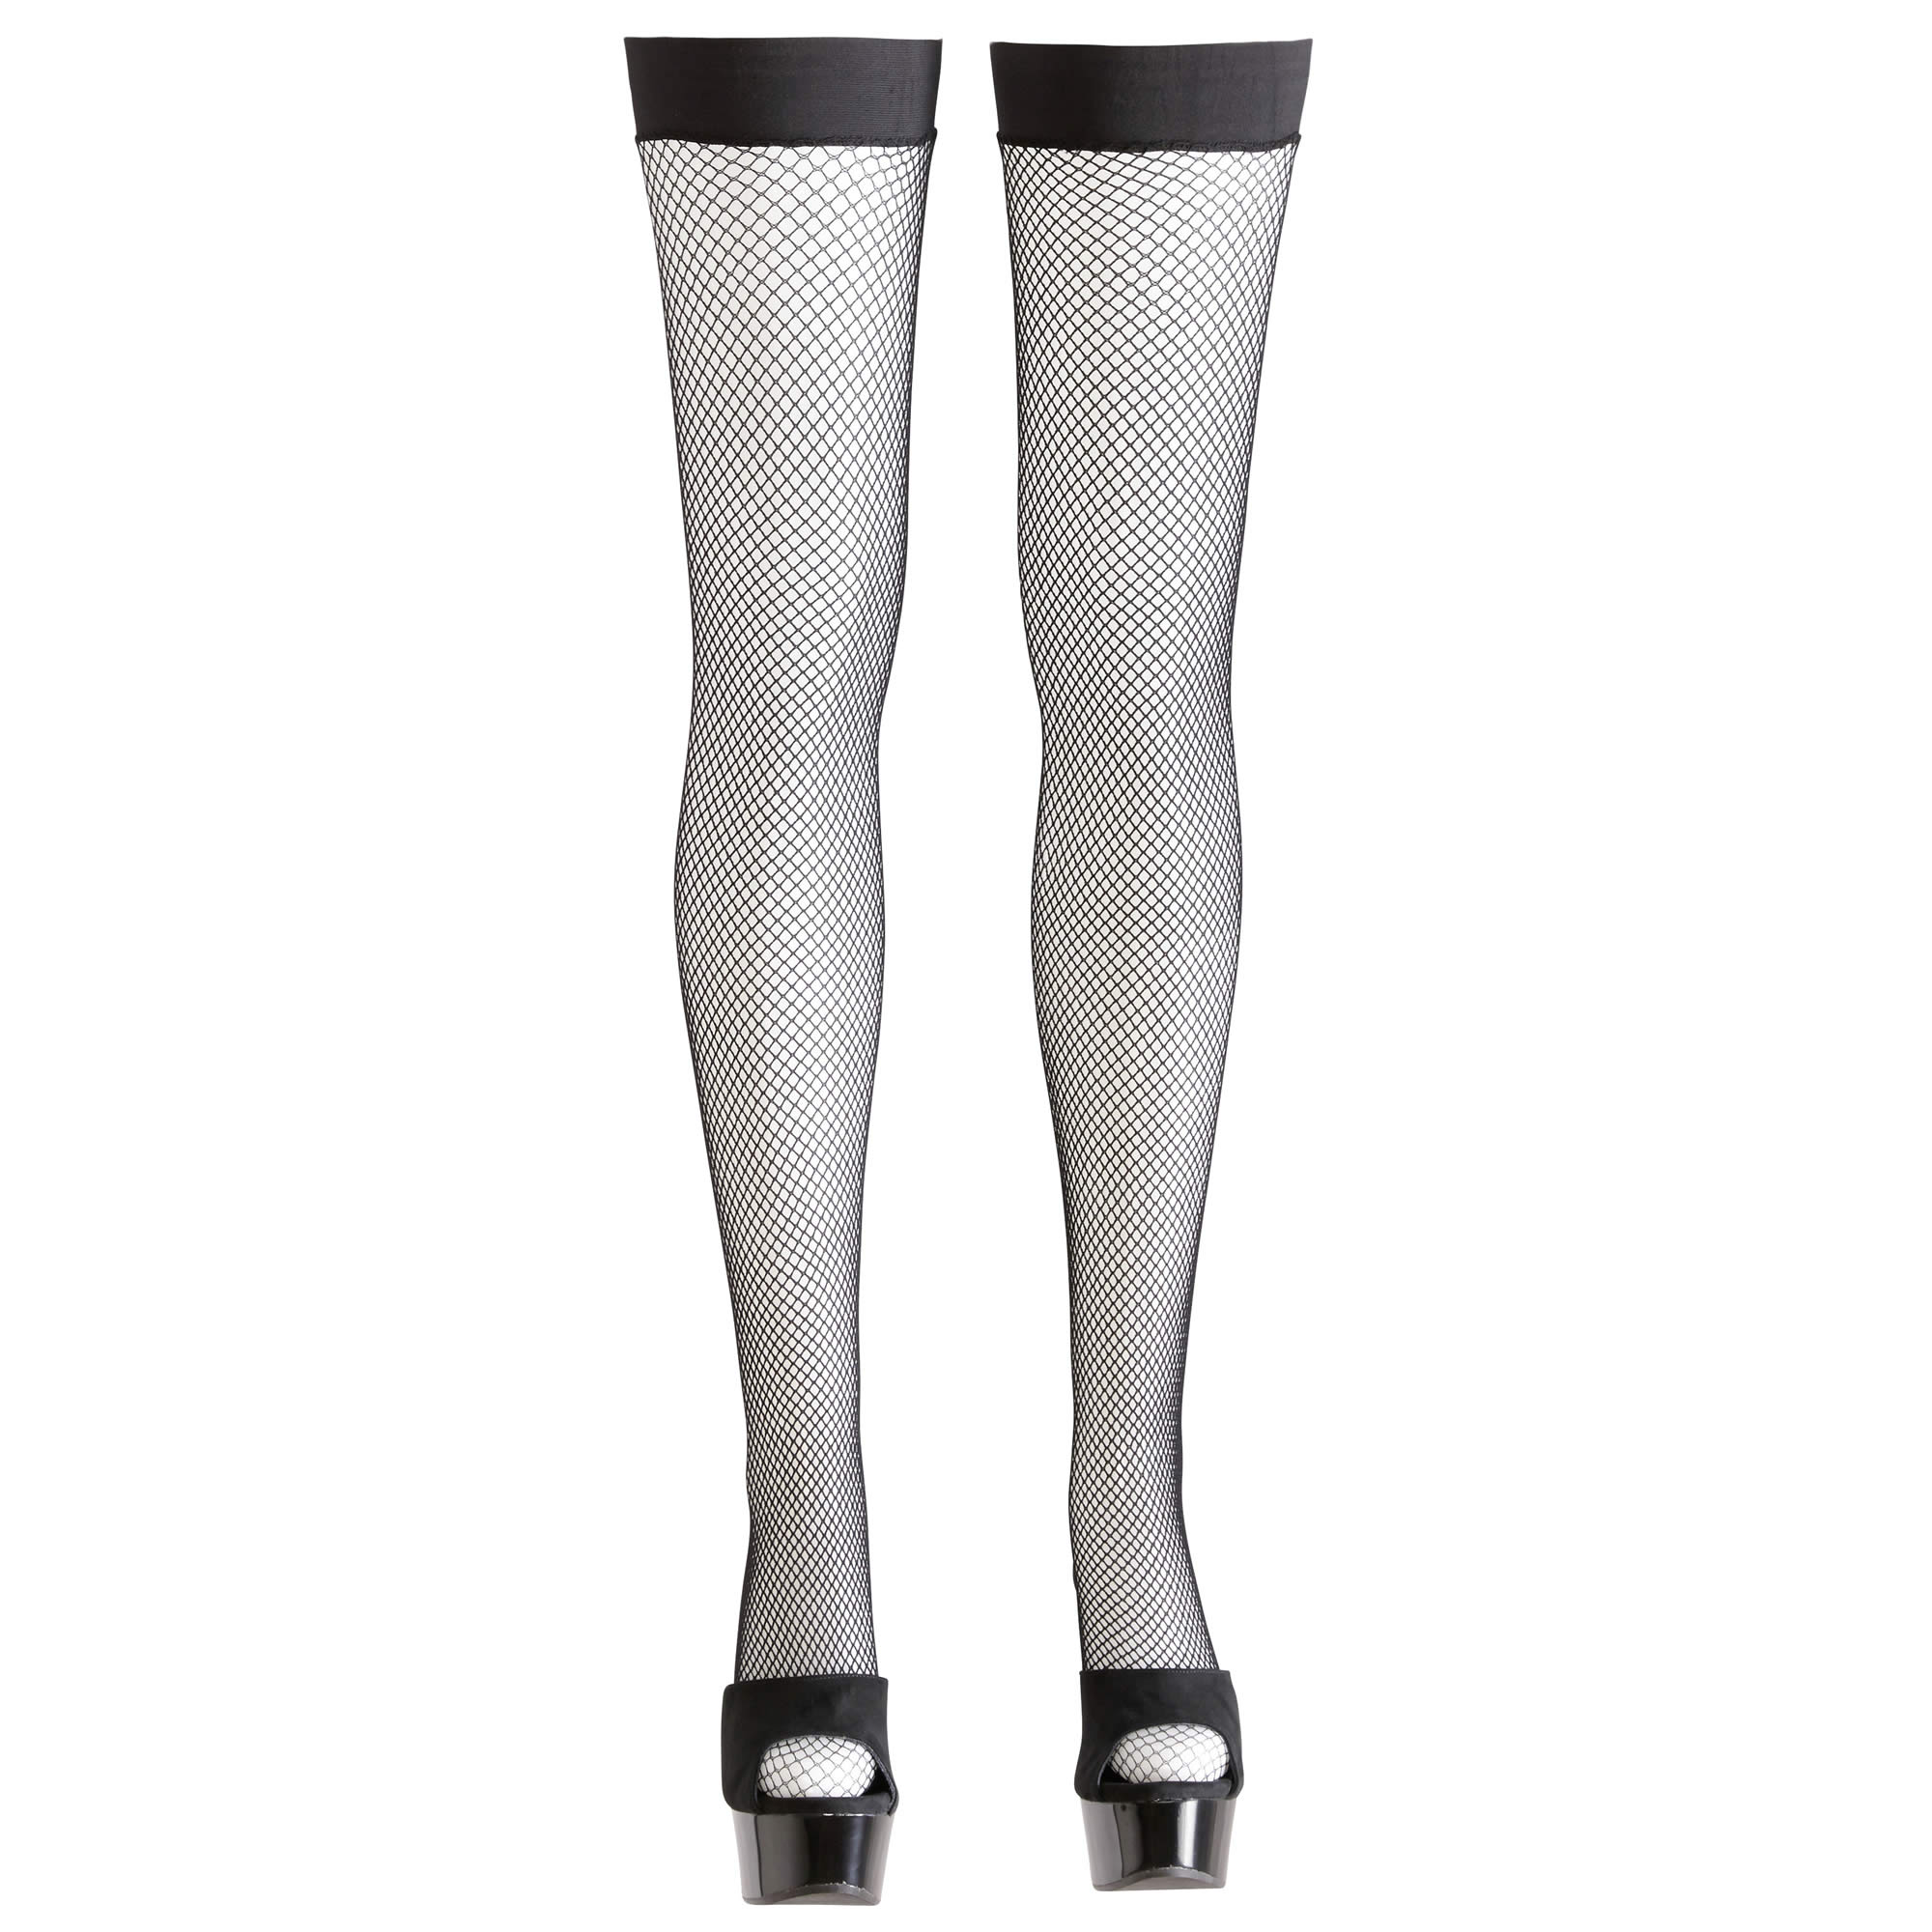 Stay-Up Net Stockings in Black